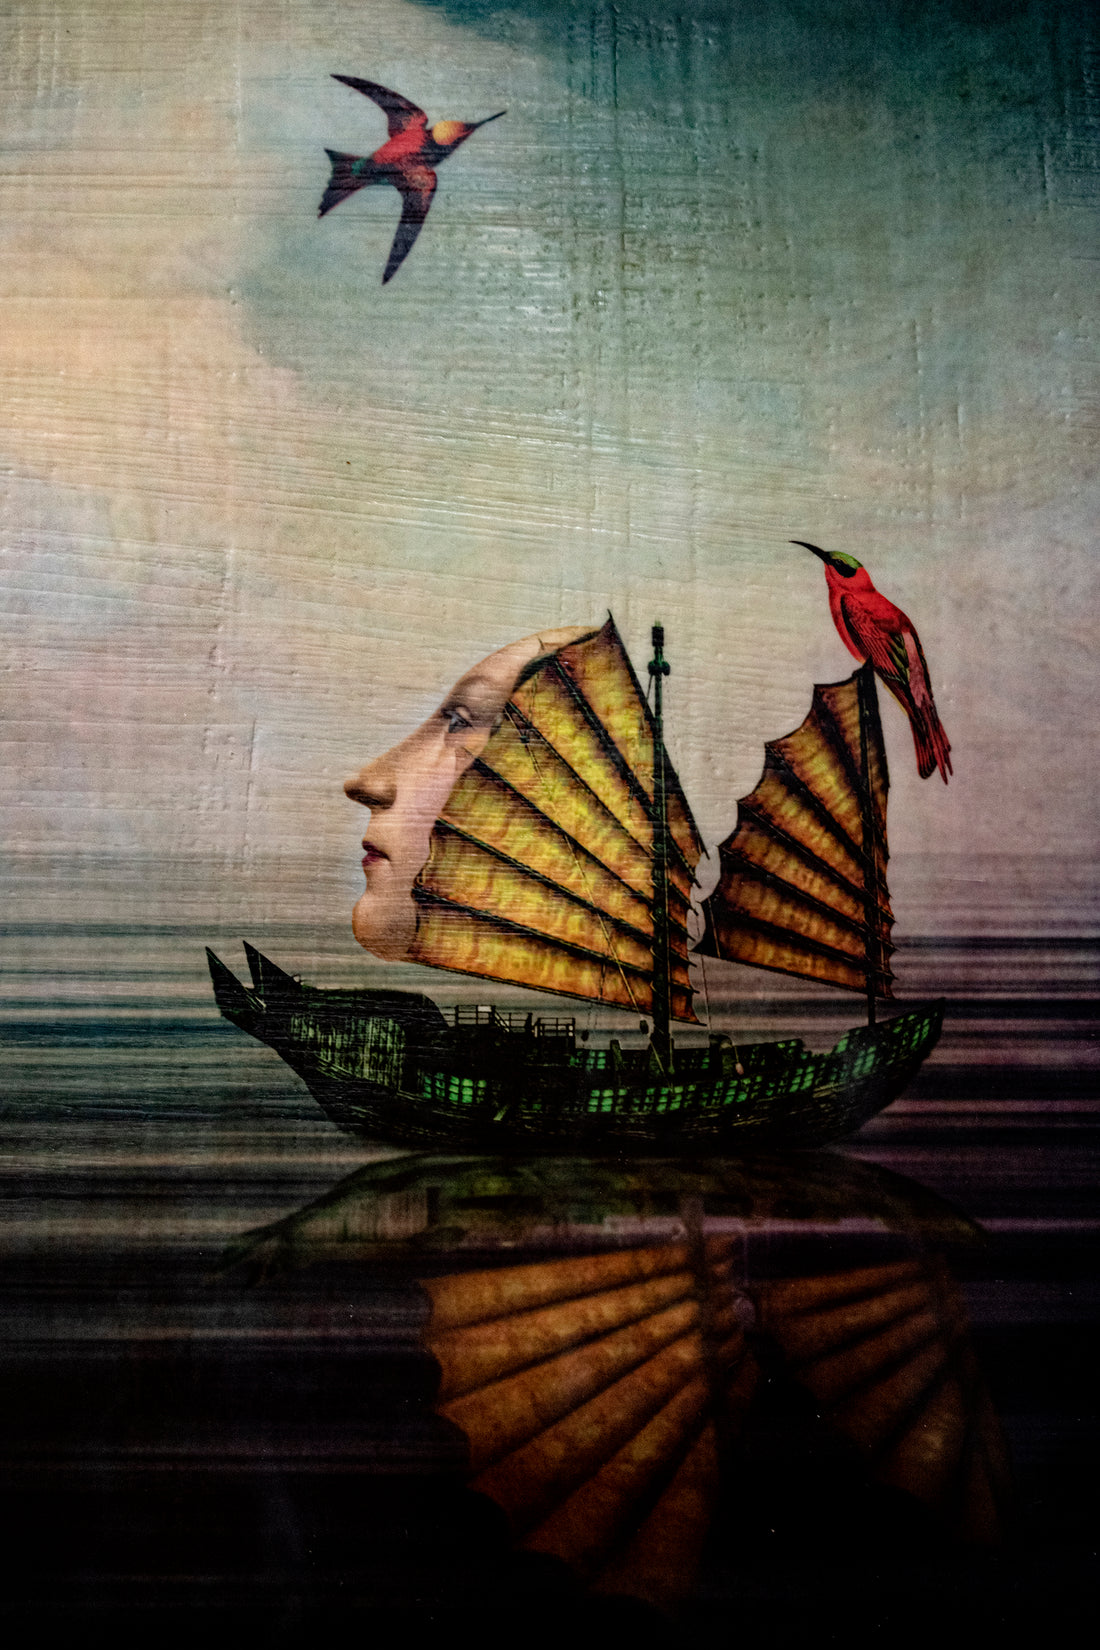 A surreal composite image of a boat with a woman's face looking up at a bird in the sky.  Image is titles A Fair Wind by Meryl Skyler and has an encaustic wax finish.